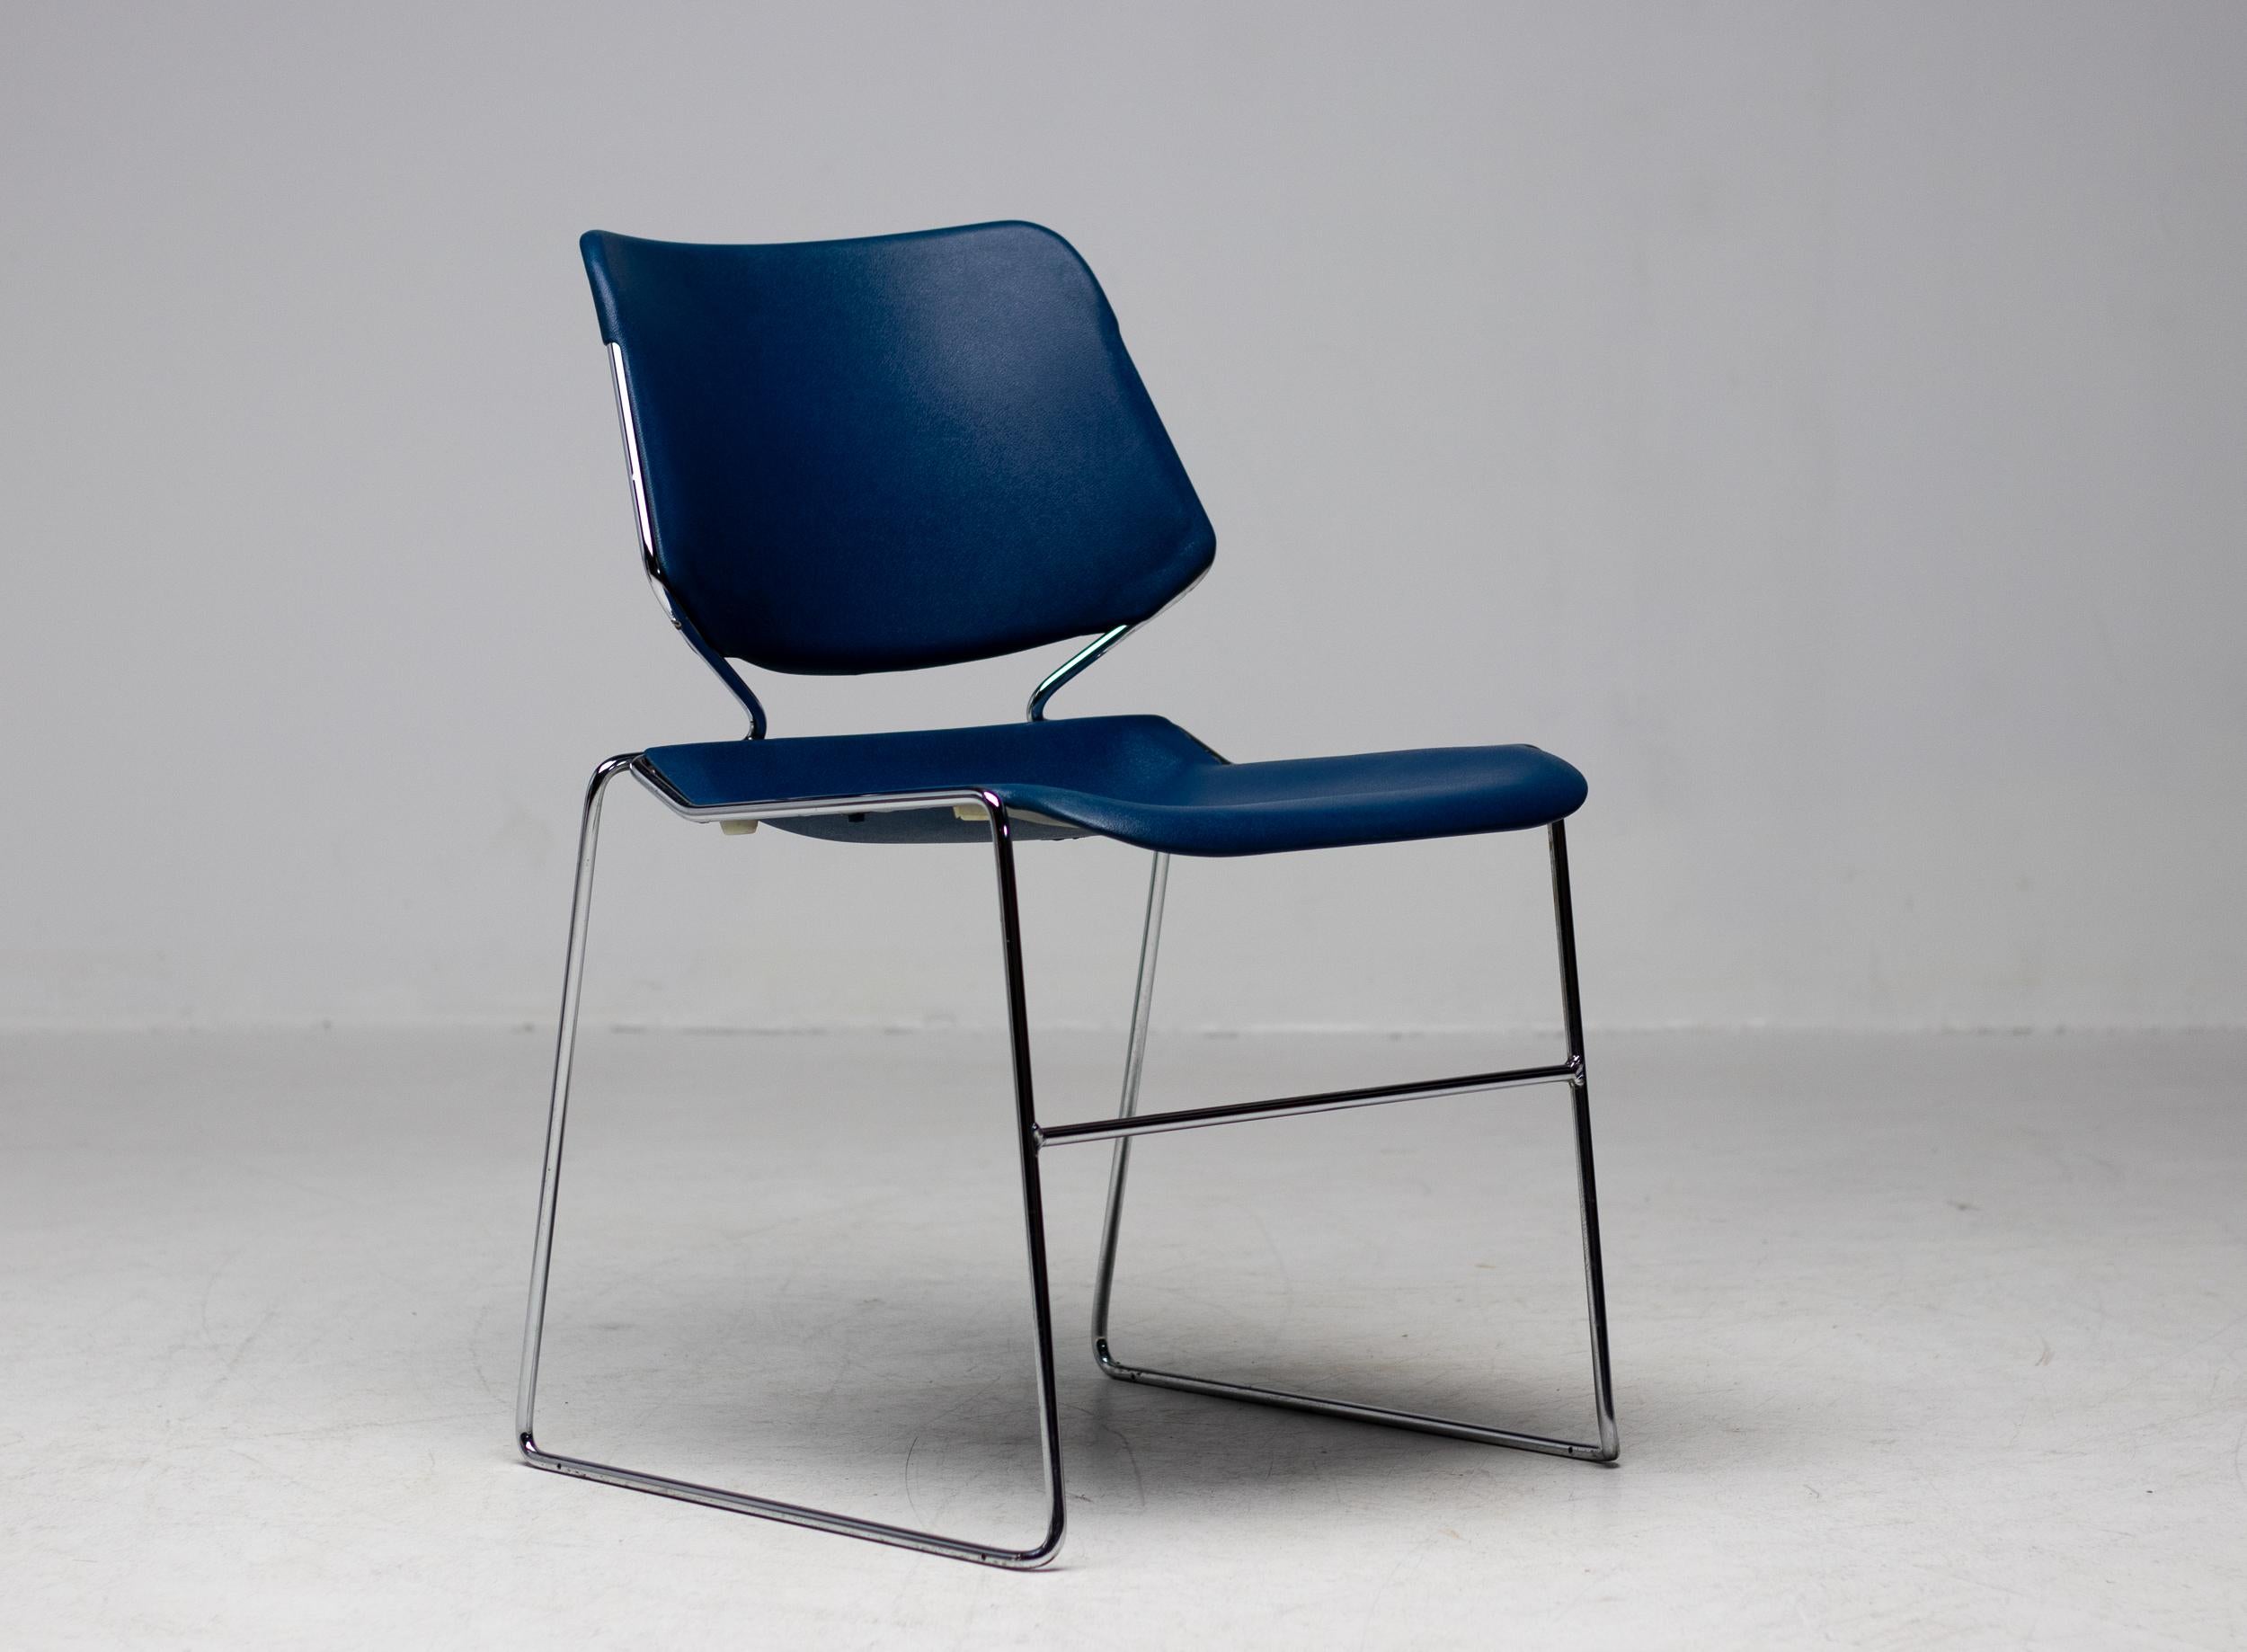 Stackable midcentury modern Krueger Matrix chairs manufactured in the USA in the 1970s. 
Clean and minimalistic design by Thomas Tolleson in beautiful cobalt blue.  
The chairs are very comfortable and the condition overall is very good with the odd